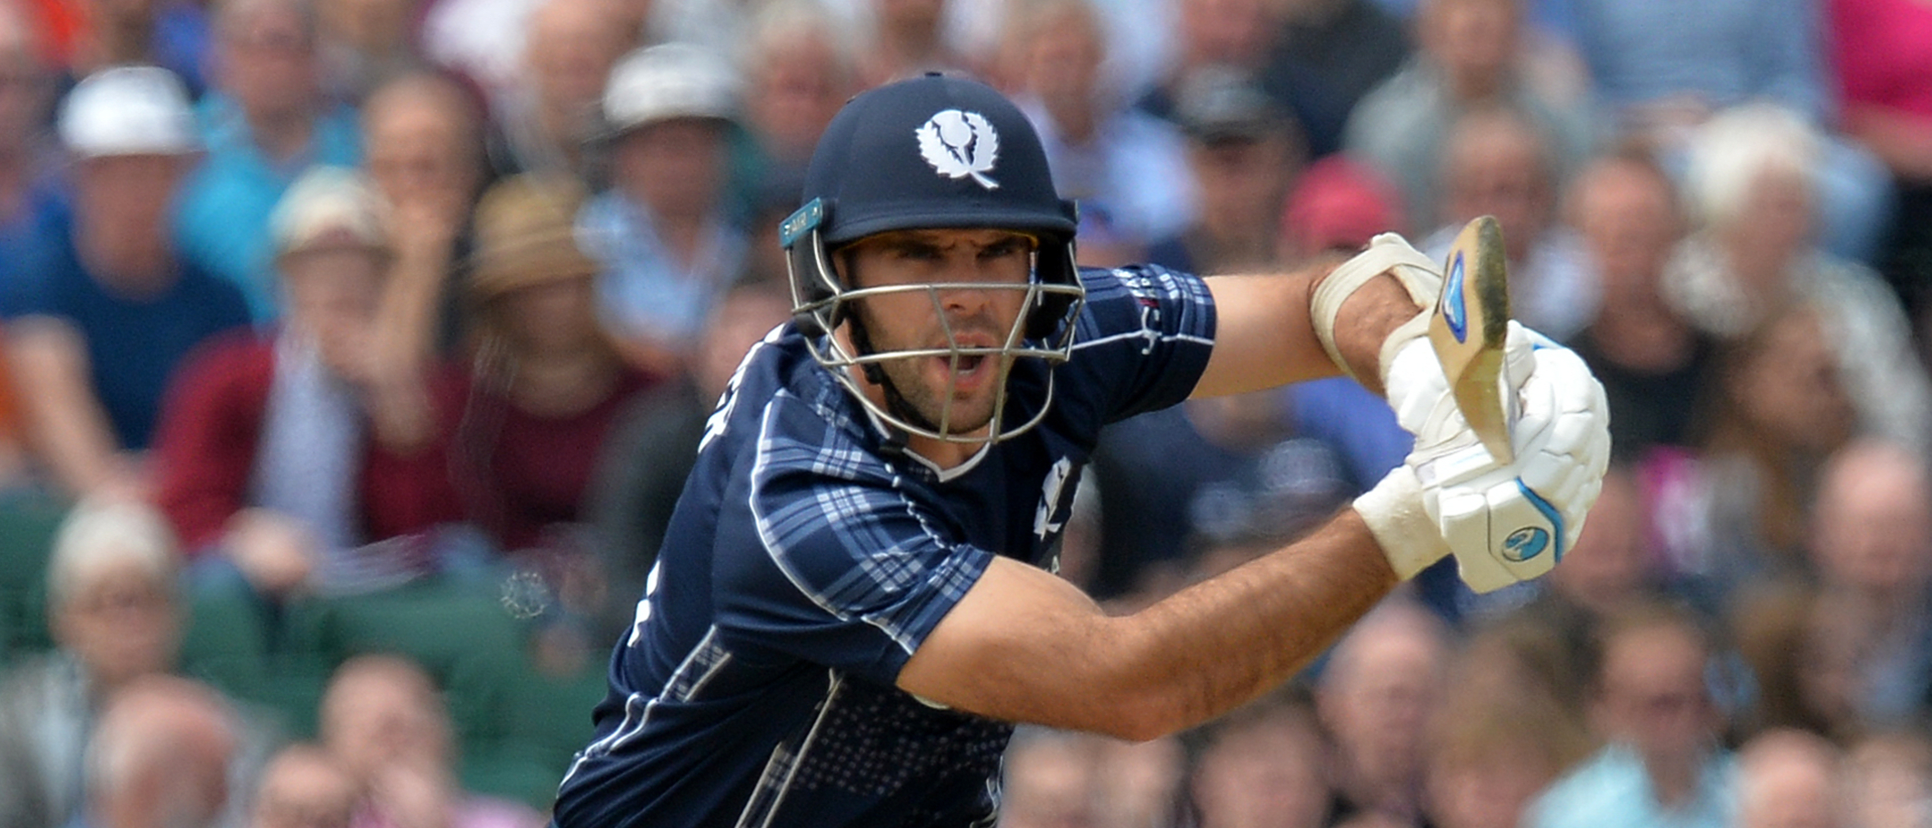 Scotland are ready for the T20 World Cup